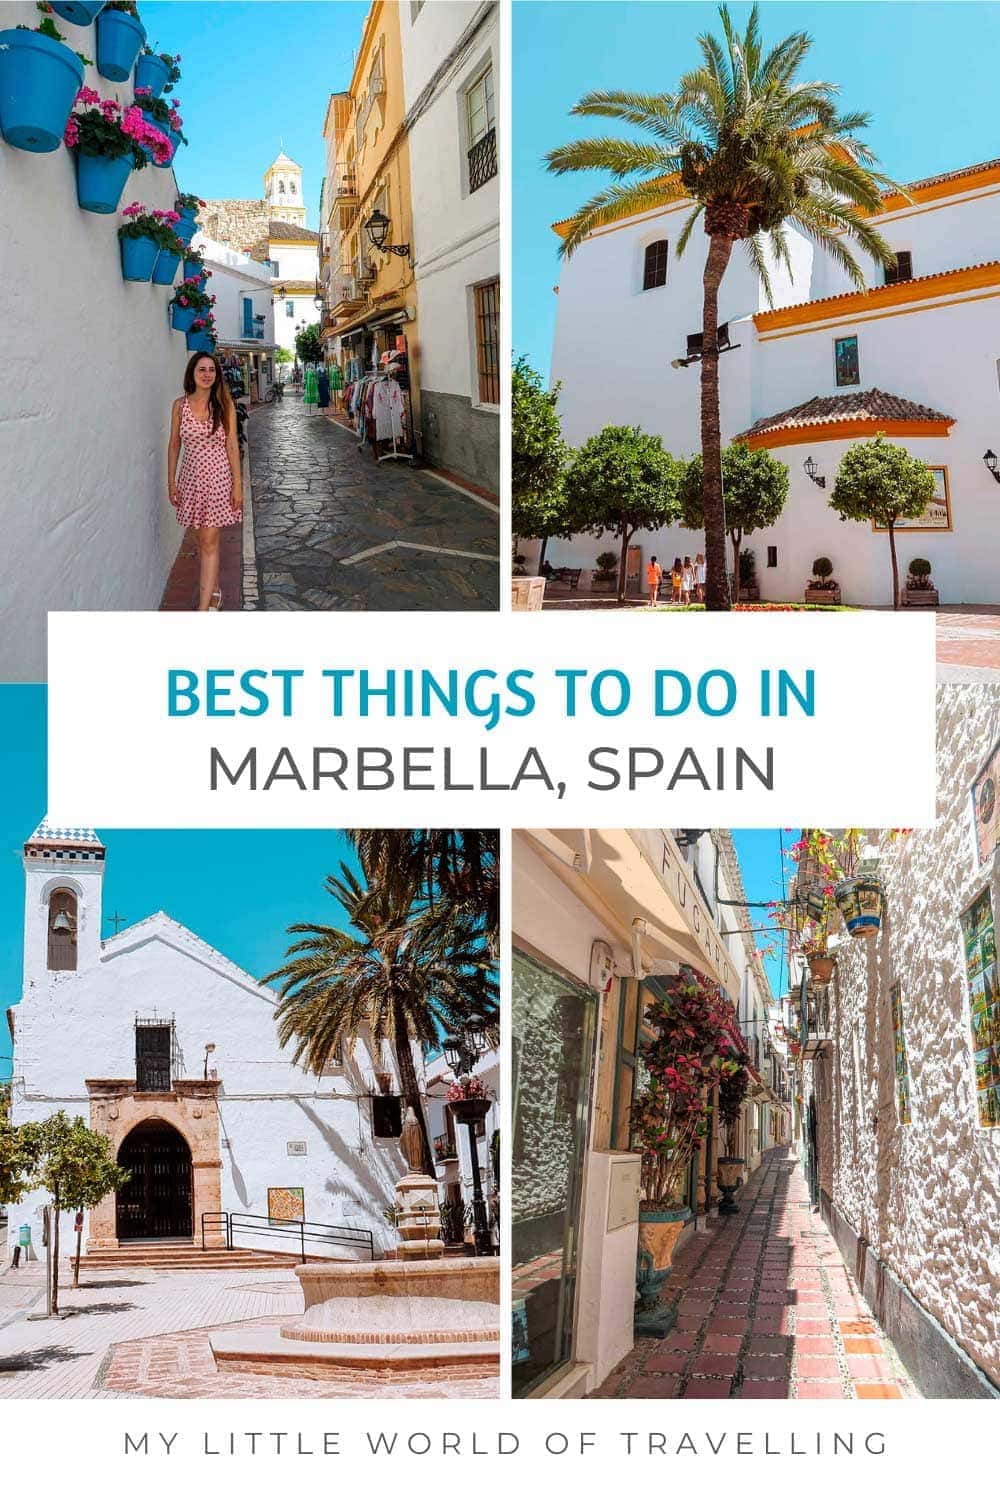 Things to do in Marbella Spain